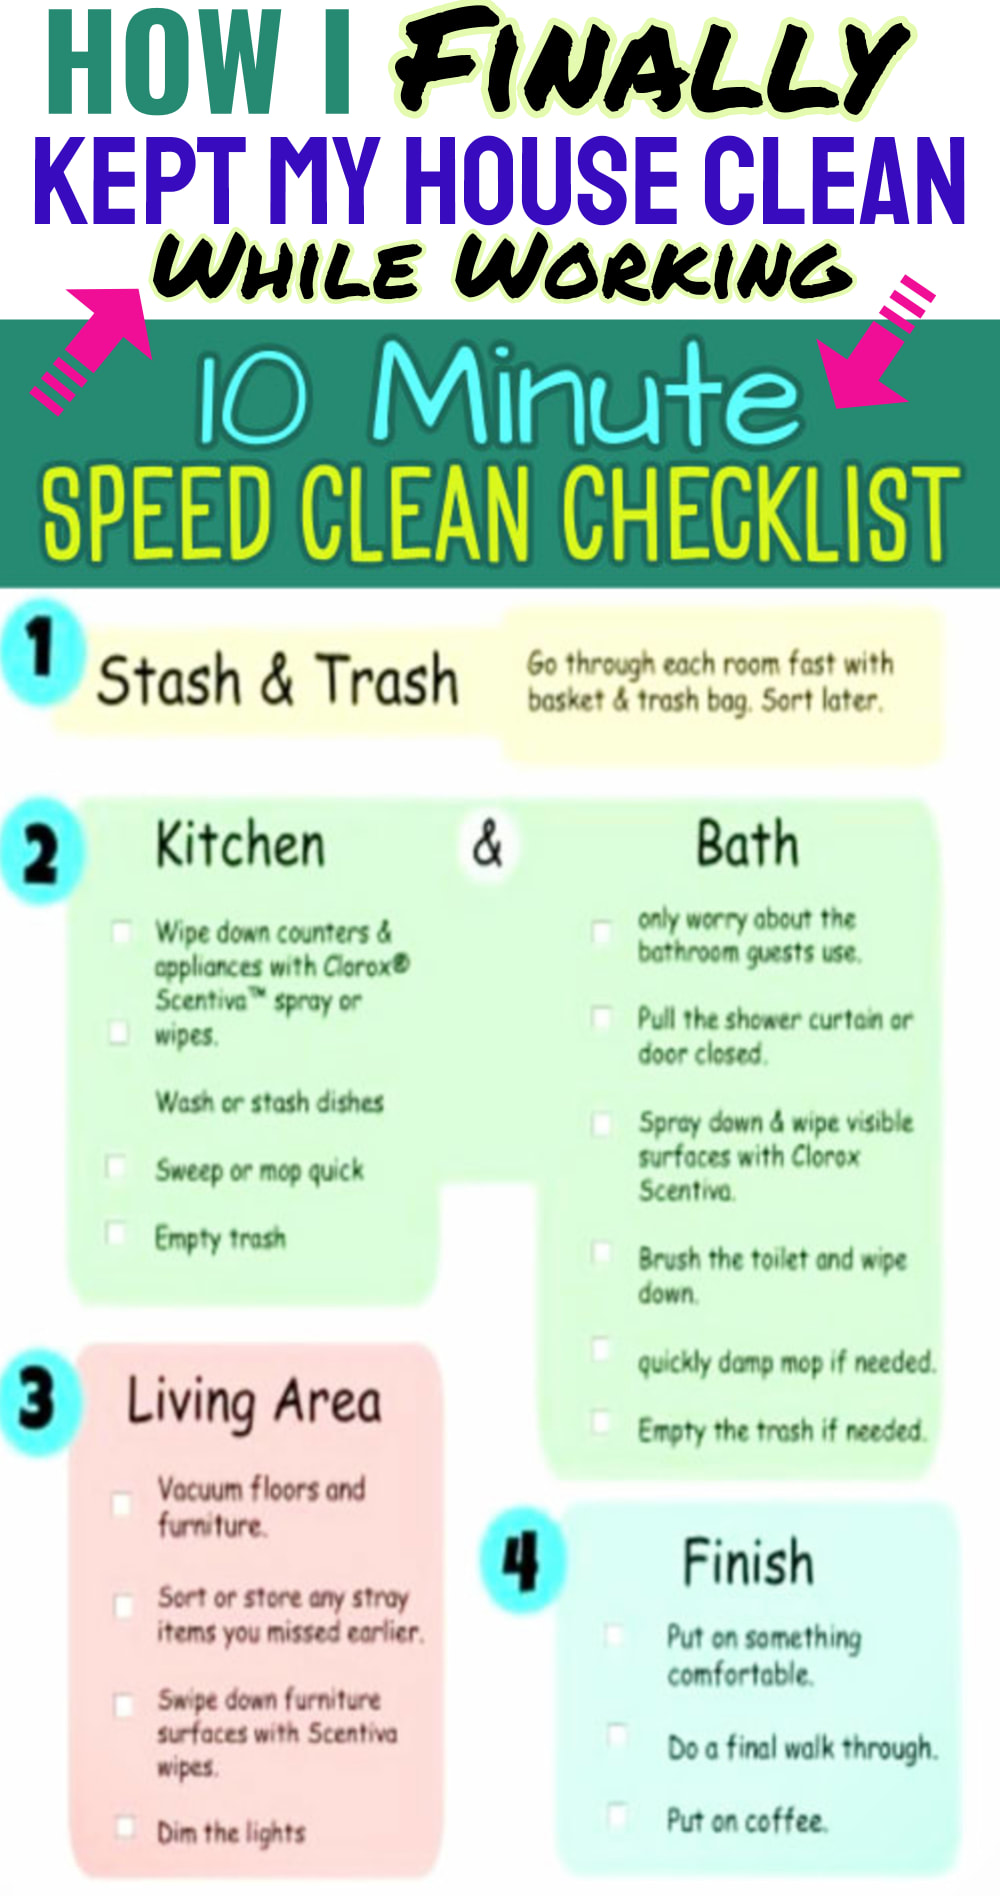 how to keep a clean house while working - busy mom speed cleaning schedule